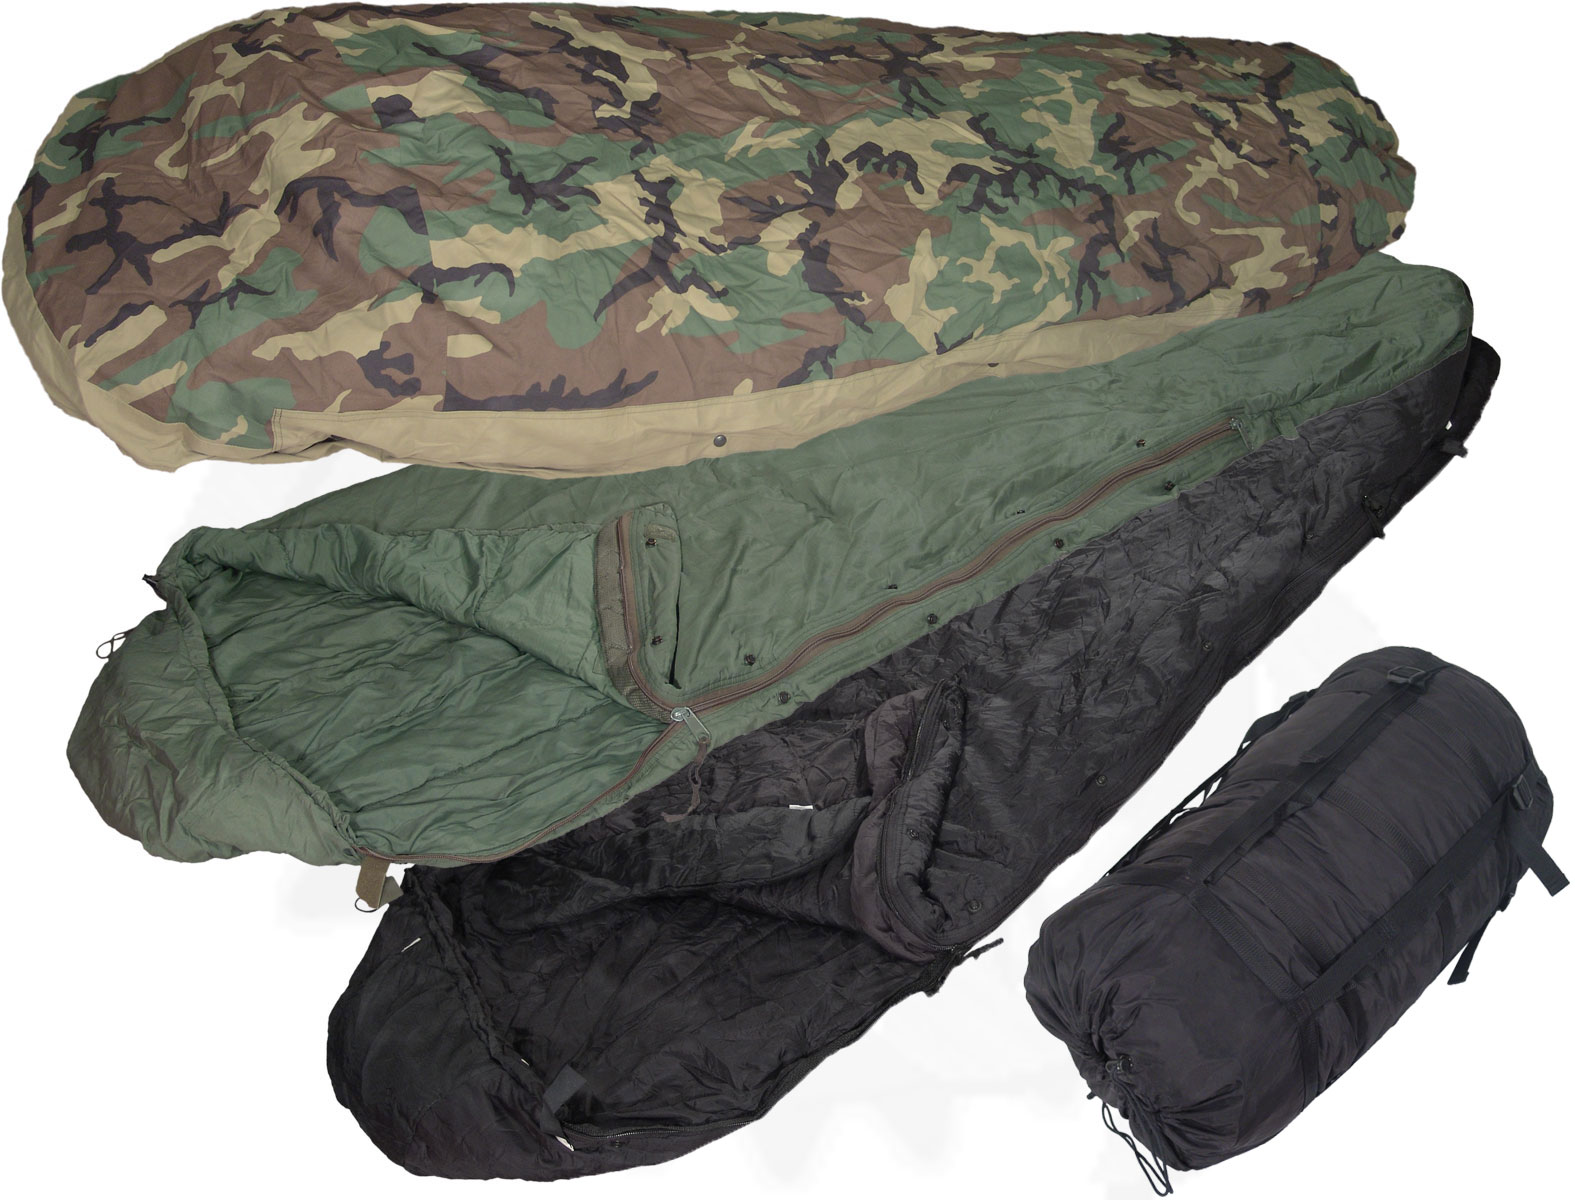 Military Sleep System Review - Inexpensive Gear You Need to Grab - The Prepper Journal